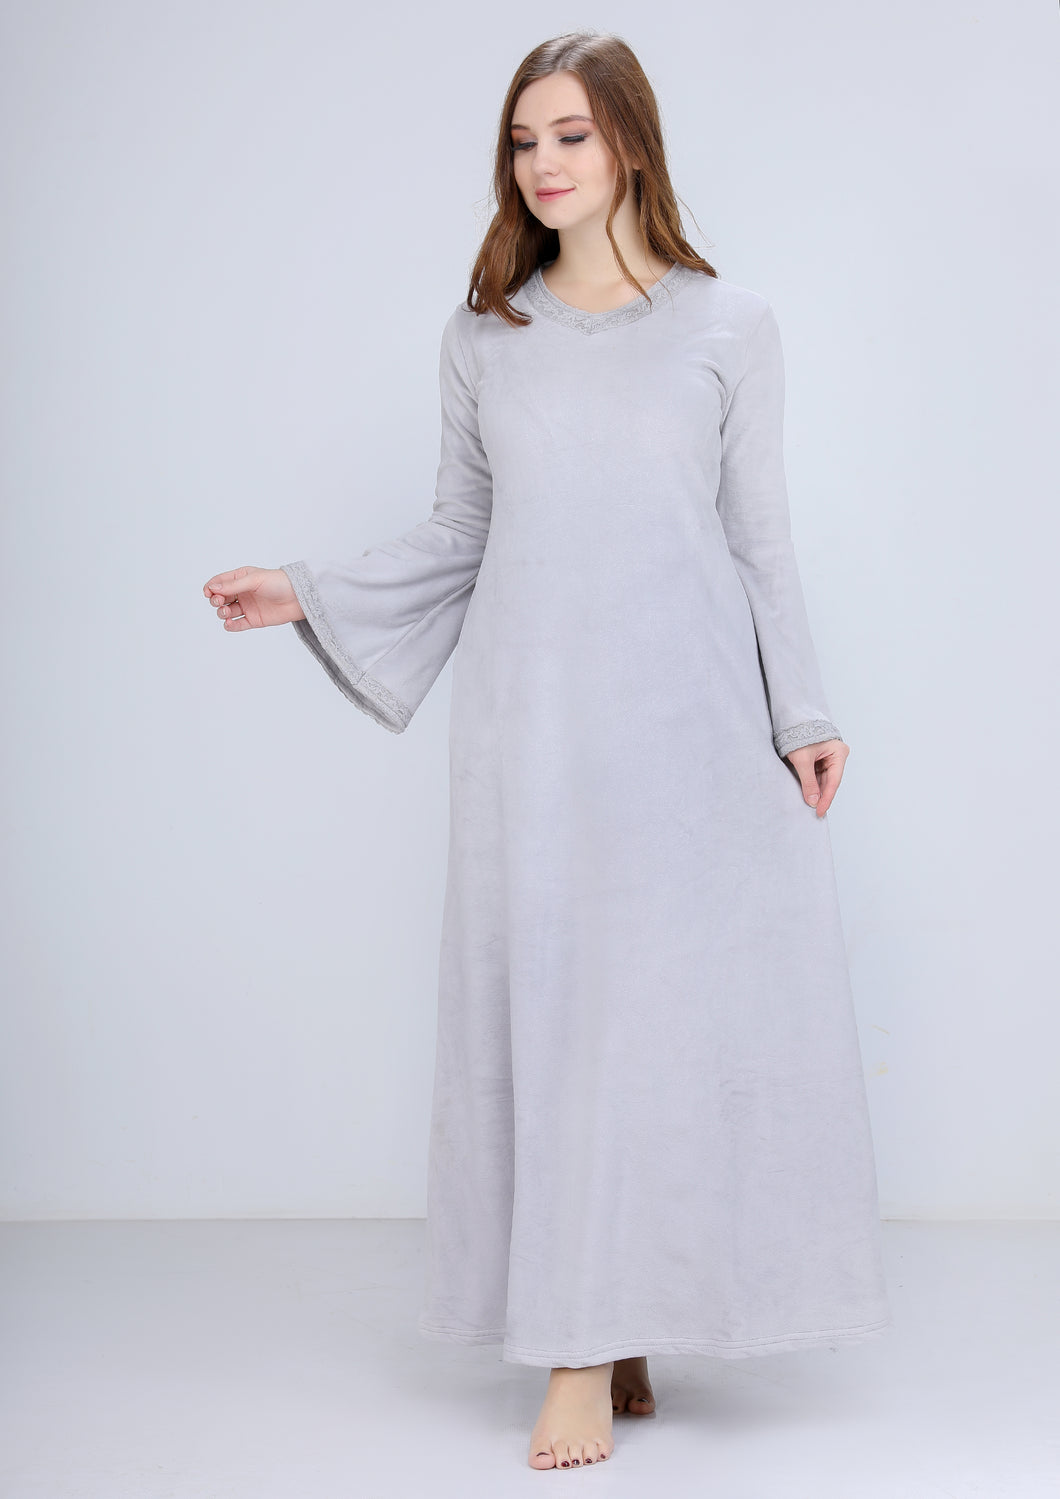 Long-sleeves gray lace cotton Heidi abaya with lining on both sides